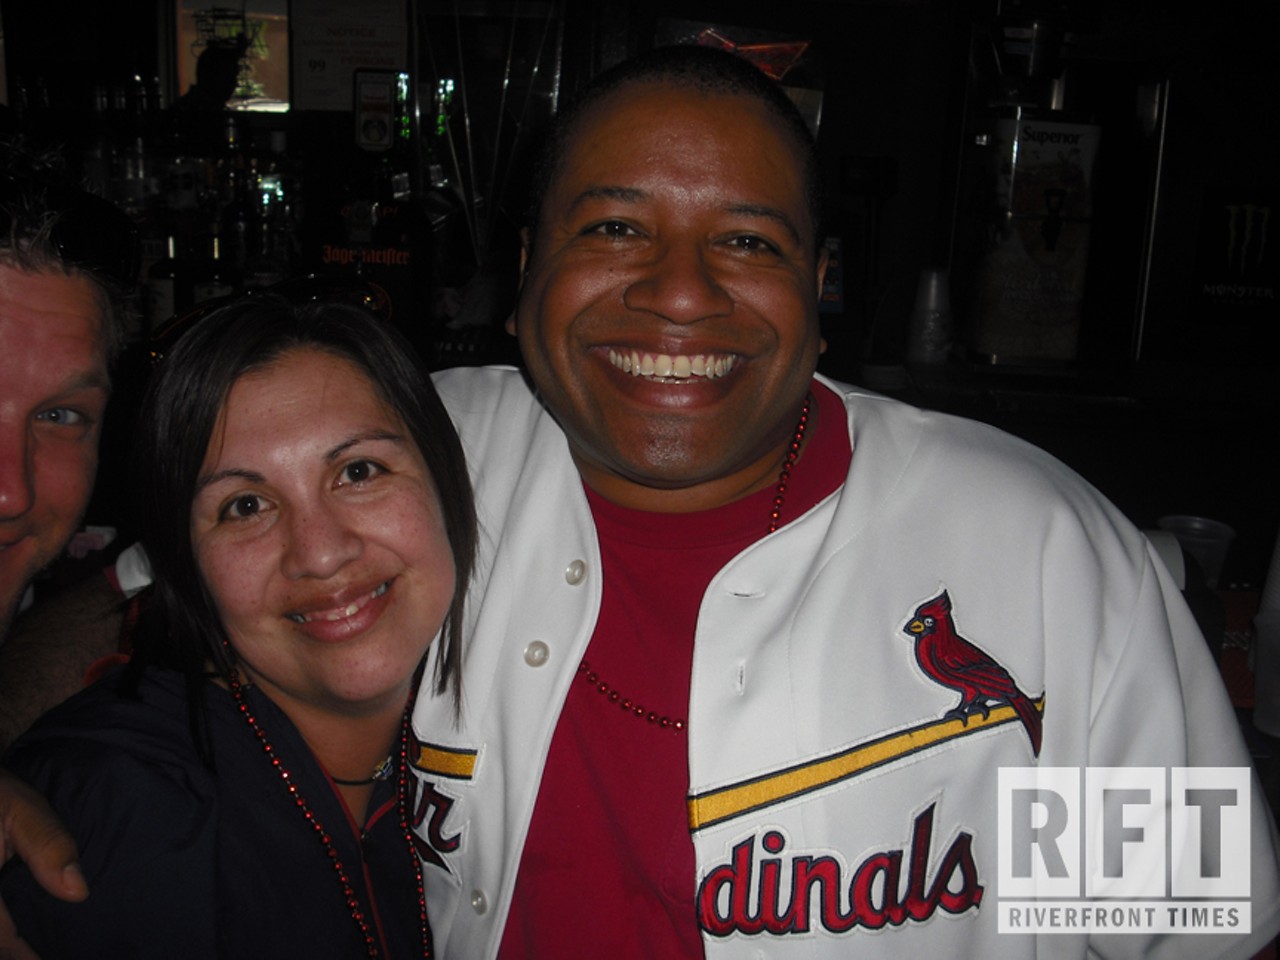 Cardinals Opening Day at Hot Shots by the Stadium